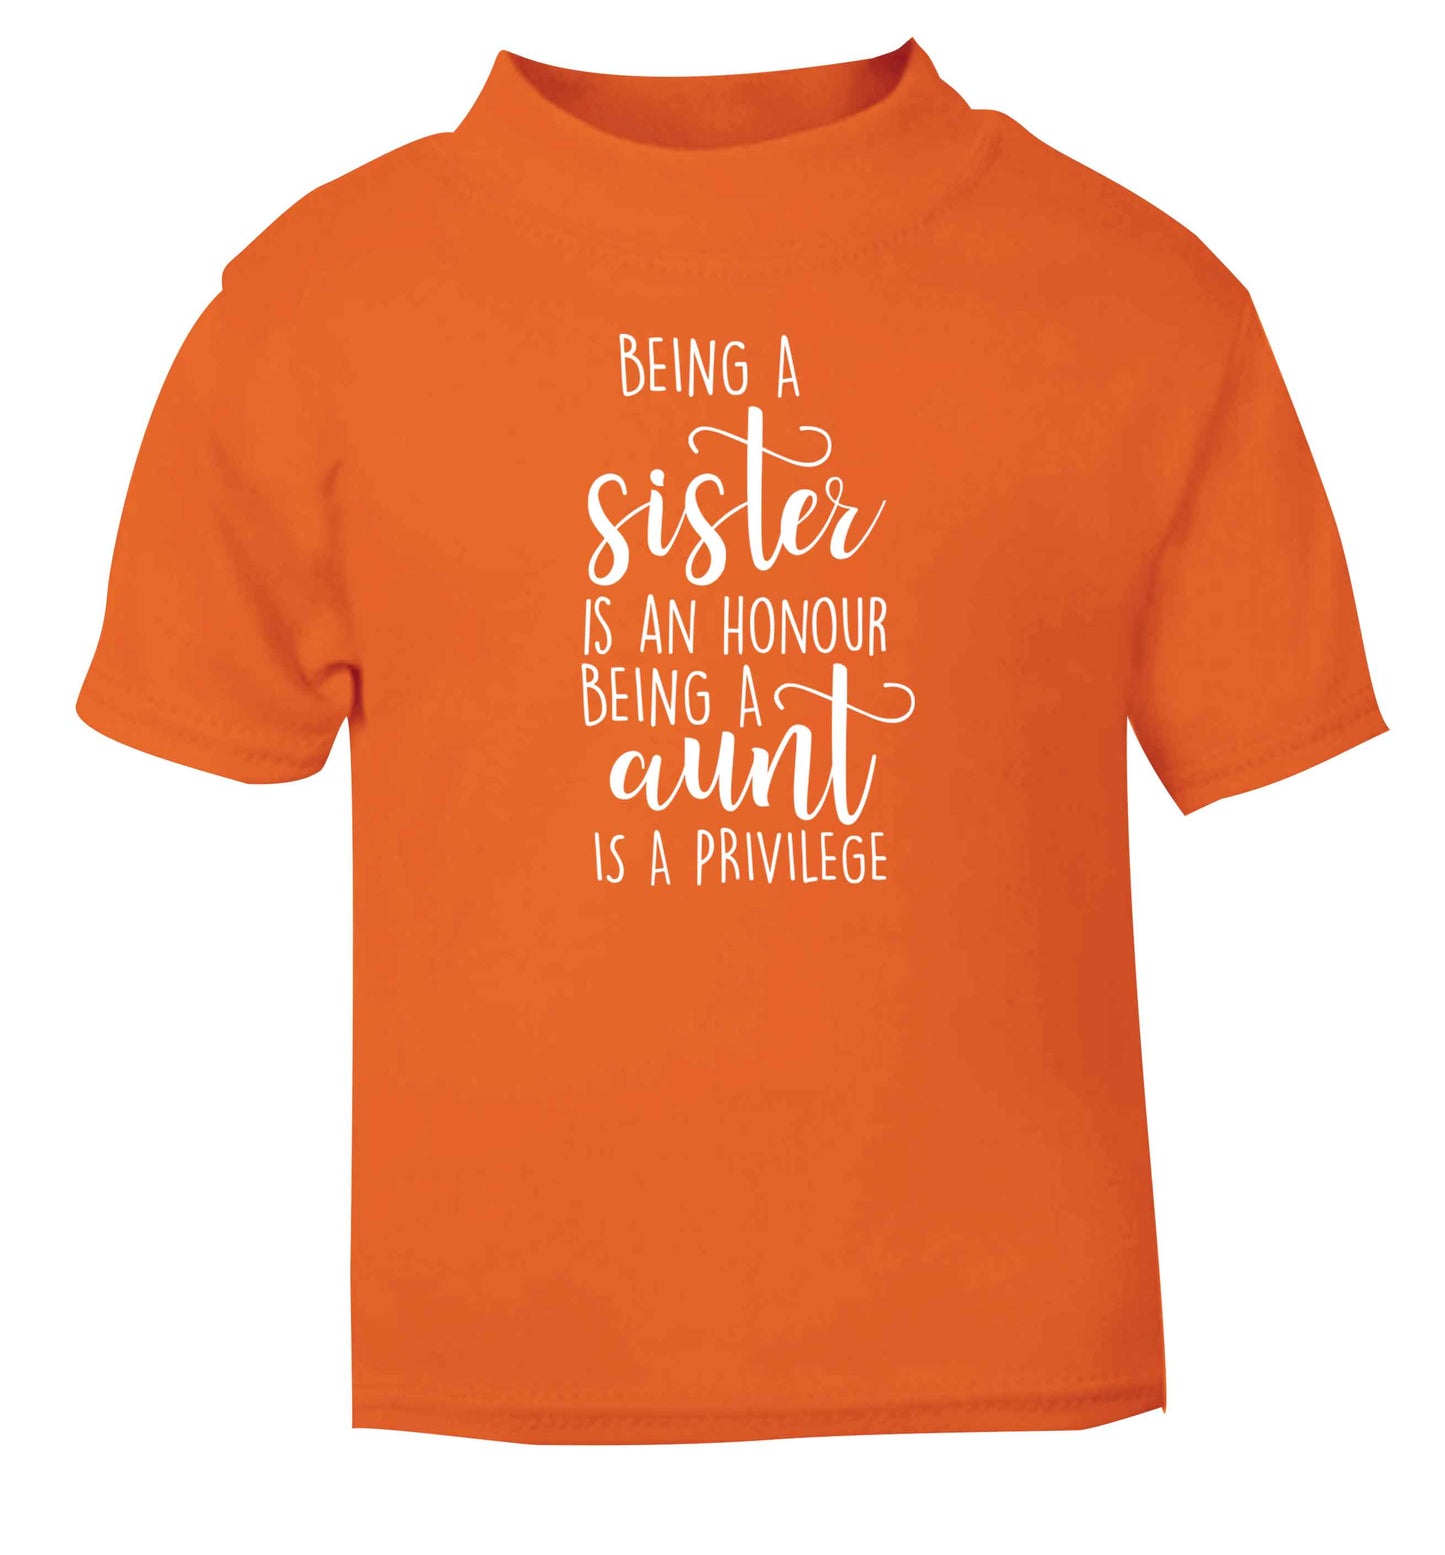 Being a sister is an honour being an auntie is a privilege orange Baby Toddler Tshirt 2 Years